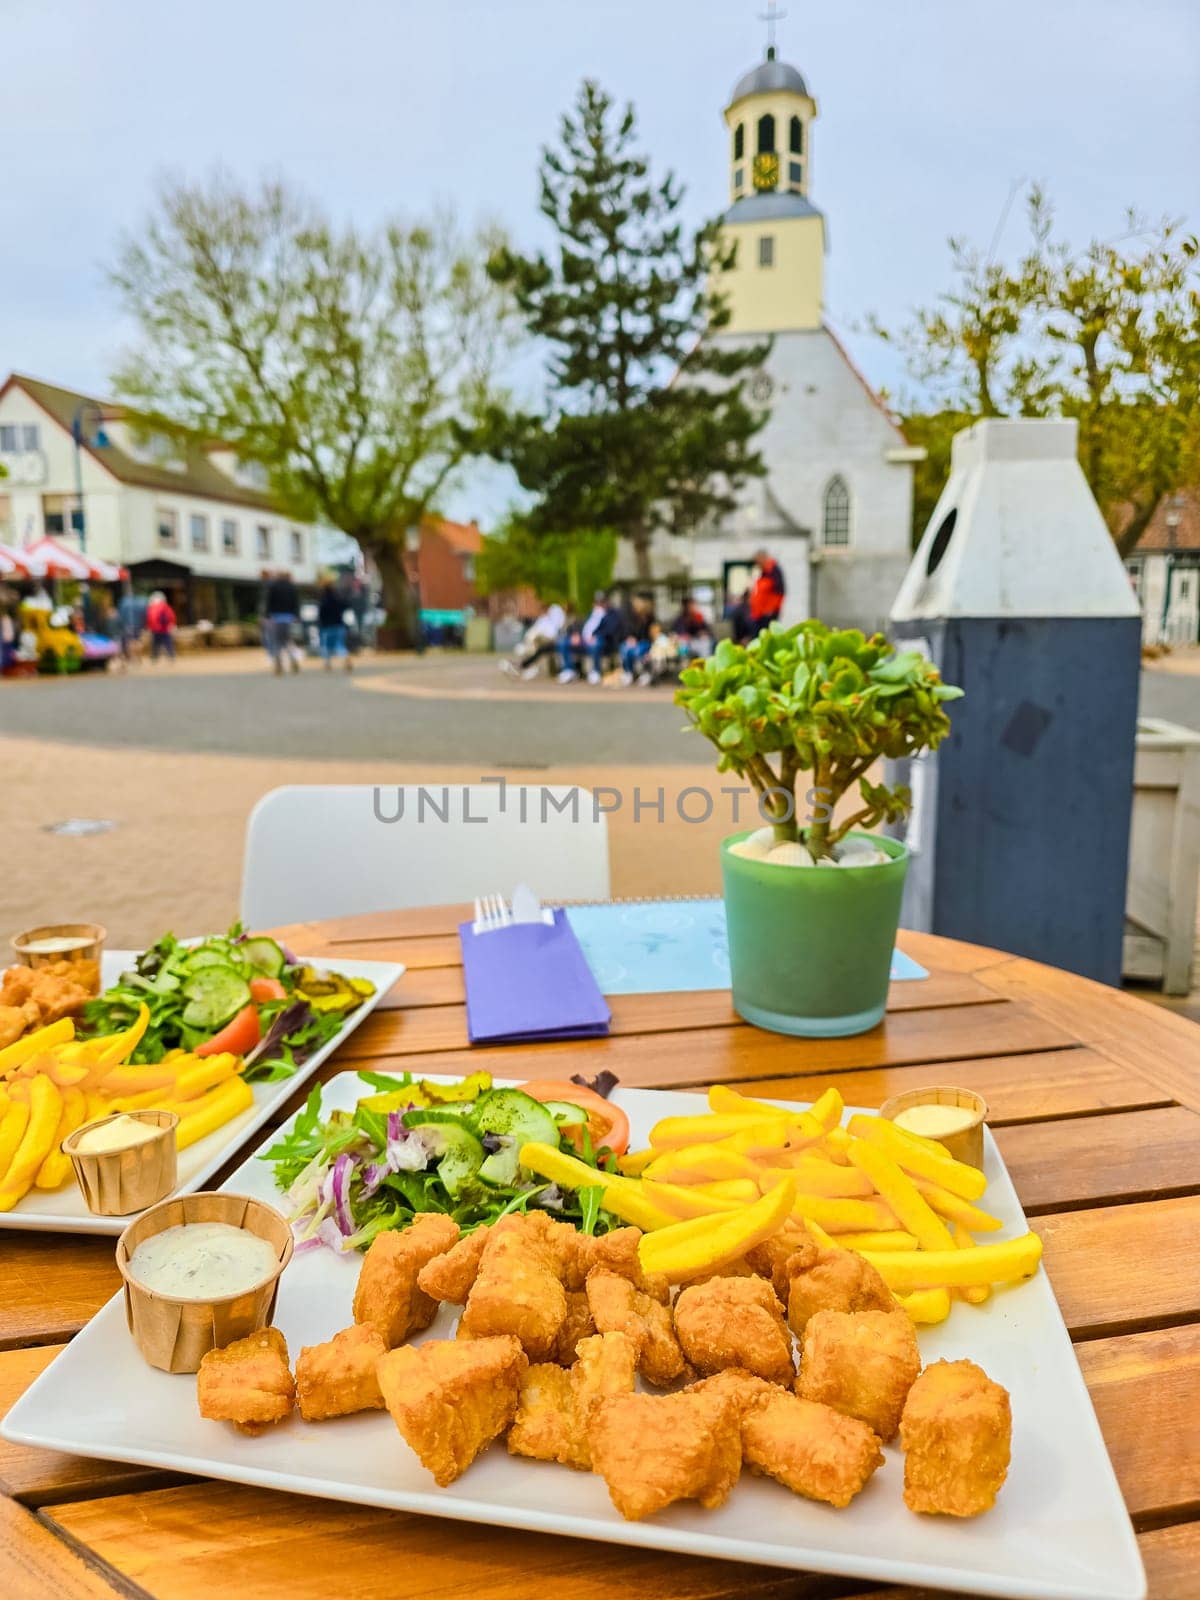 Two perfectly crispy plates of fish and chips, expertly presented on a rustic wooden table in Texel, Netherlands.